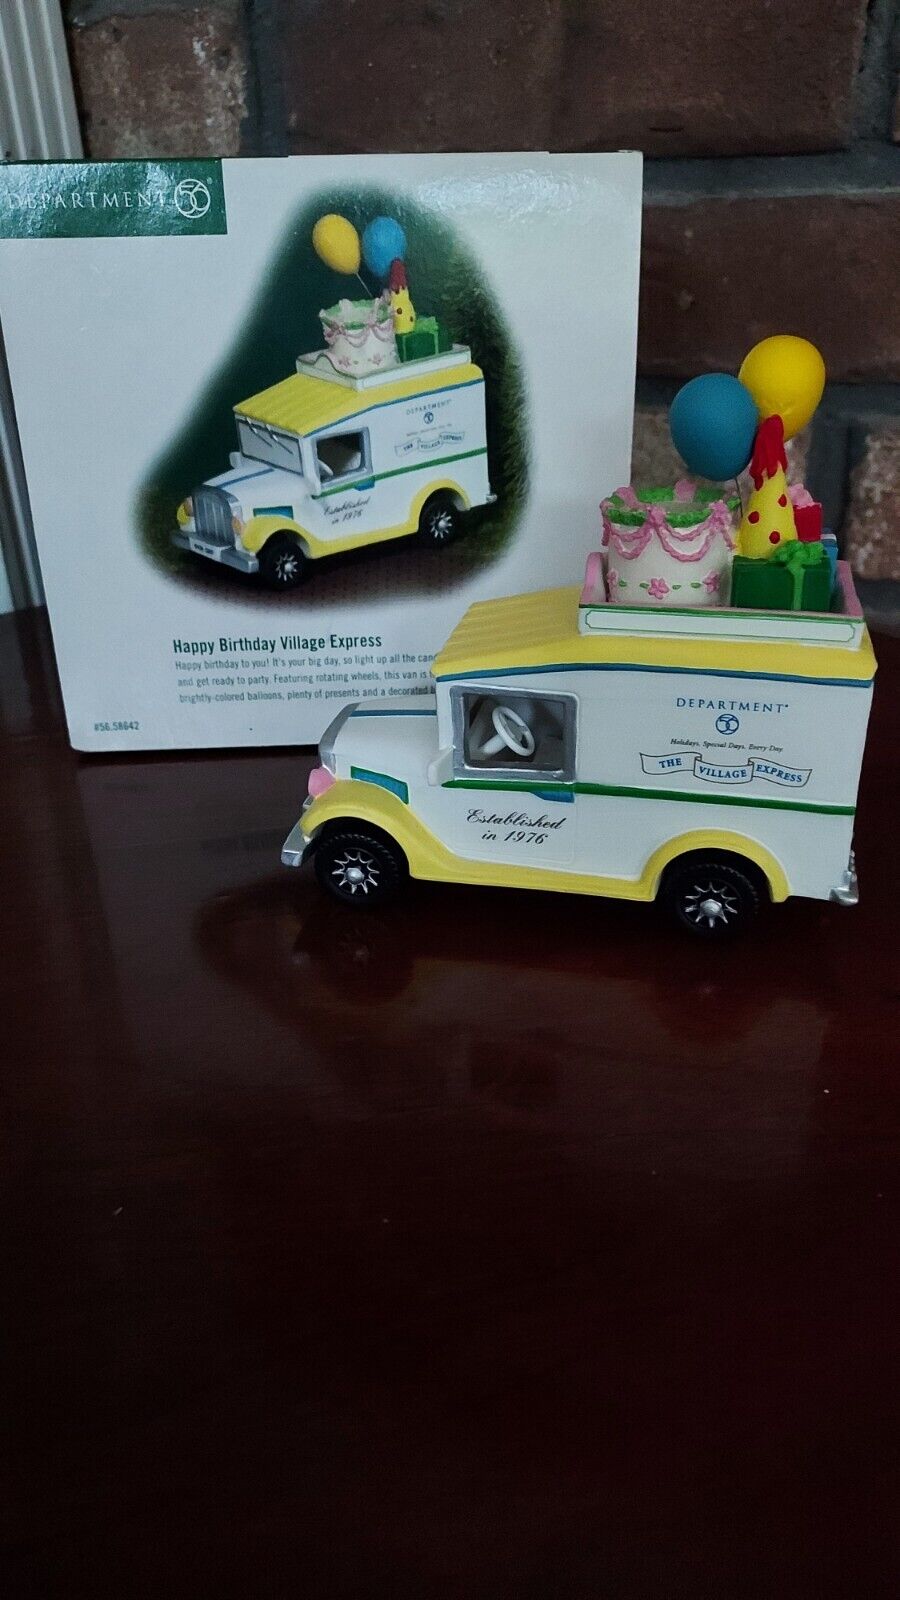 Dept 56 Happy Birthday Village Express Truck Balloons 2002 Heritage Collection